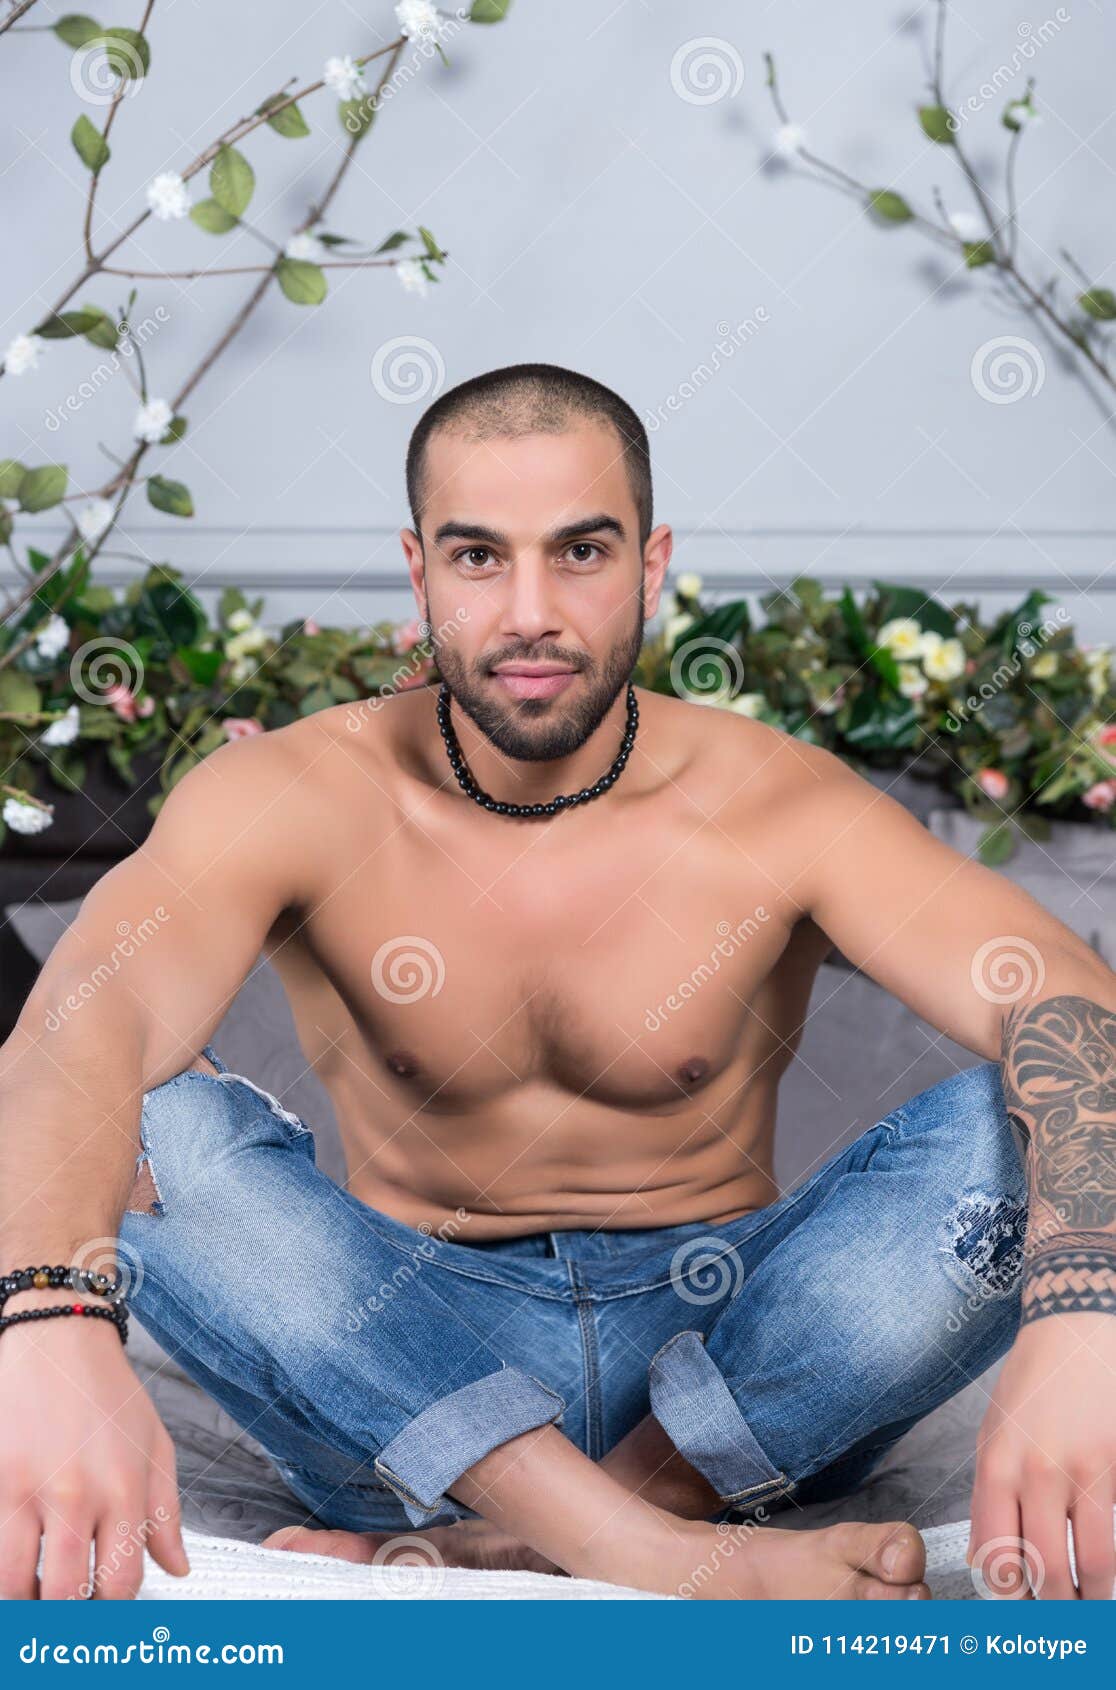 Shirtless Male Model Lying Alone On His Bed Stock Photo 